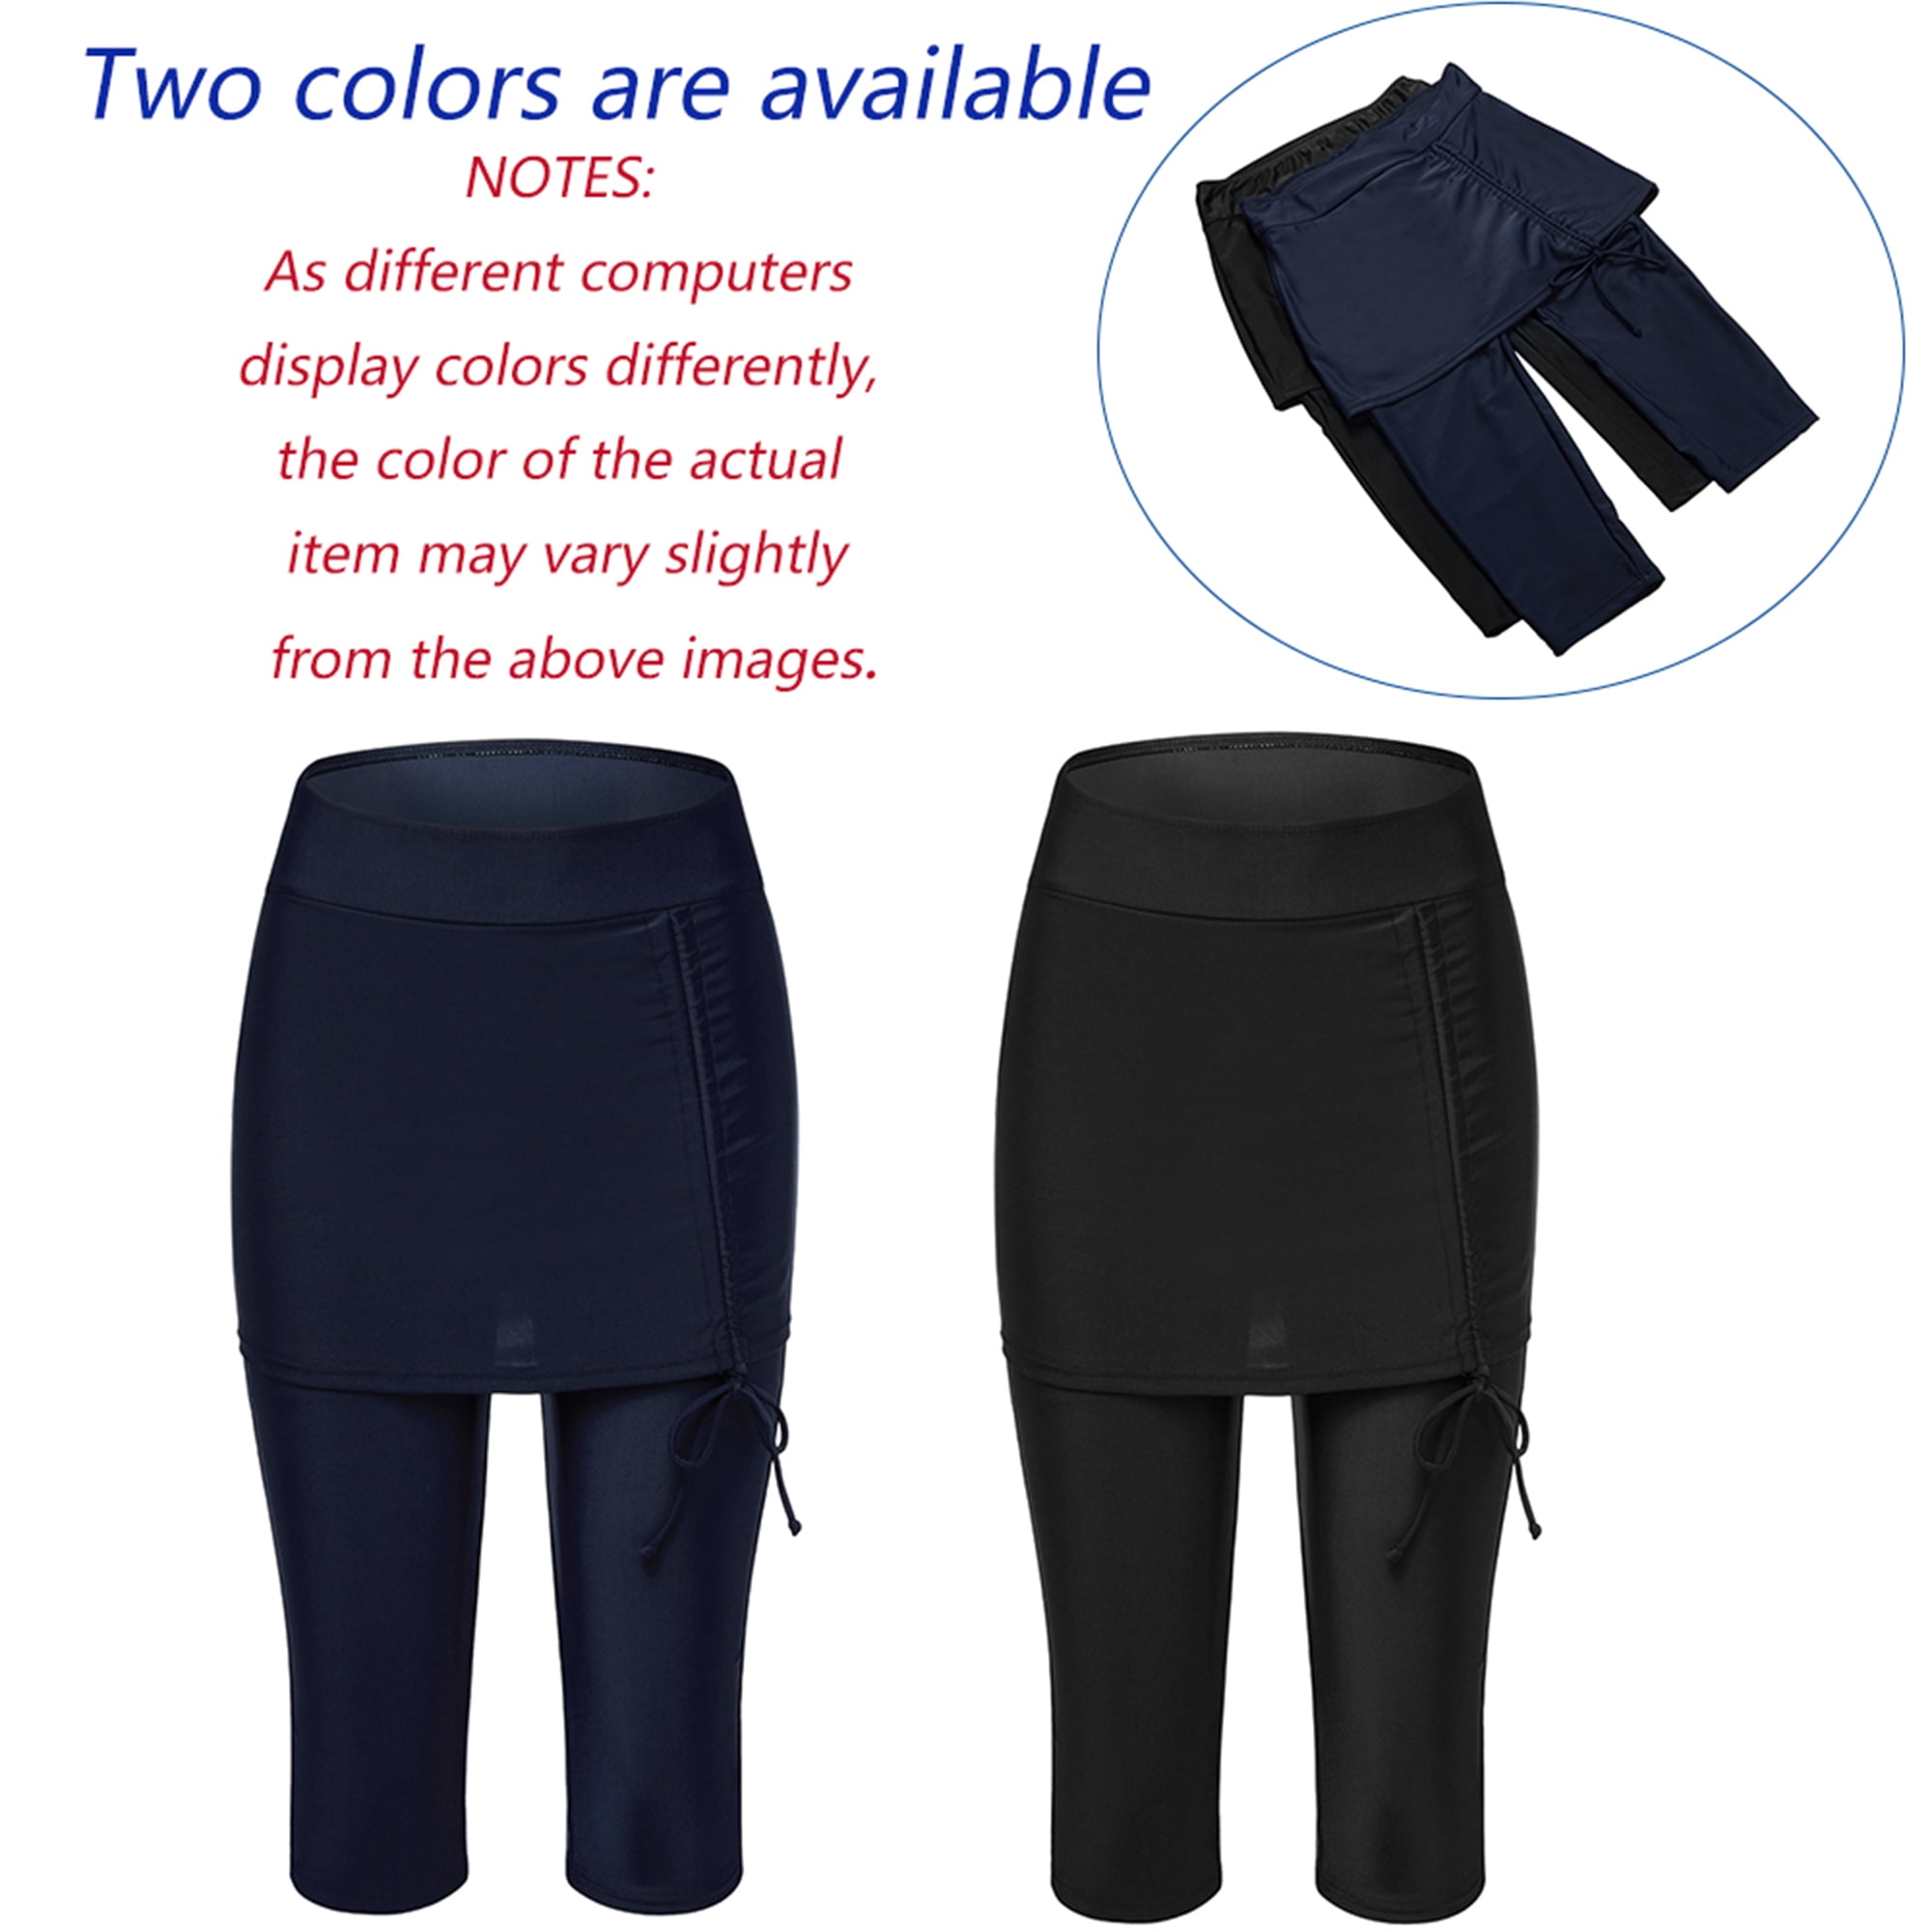 Buy SWIM SKIRT With Attached Leggings Modest Active Swimwear Provides  Modest UV Coverage for Swimwear and Sportswear. Online in India - Etsy